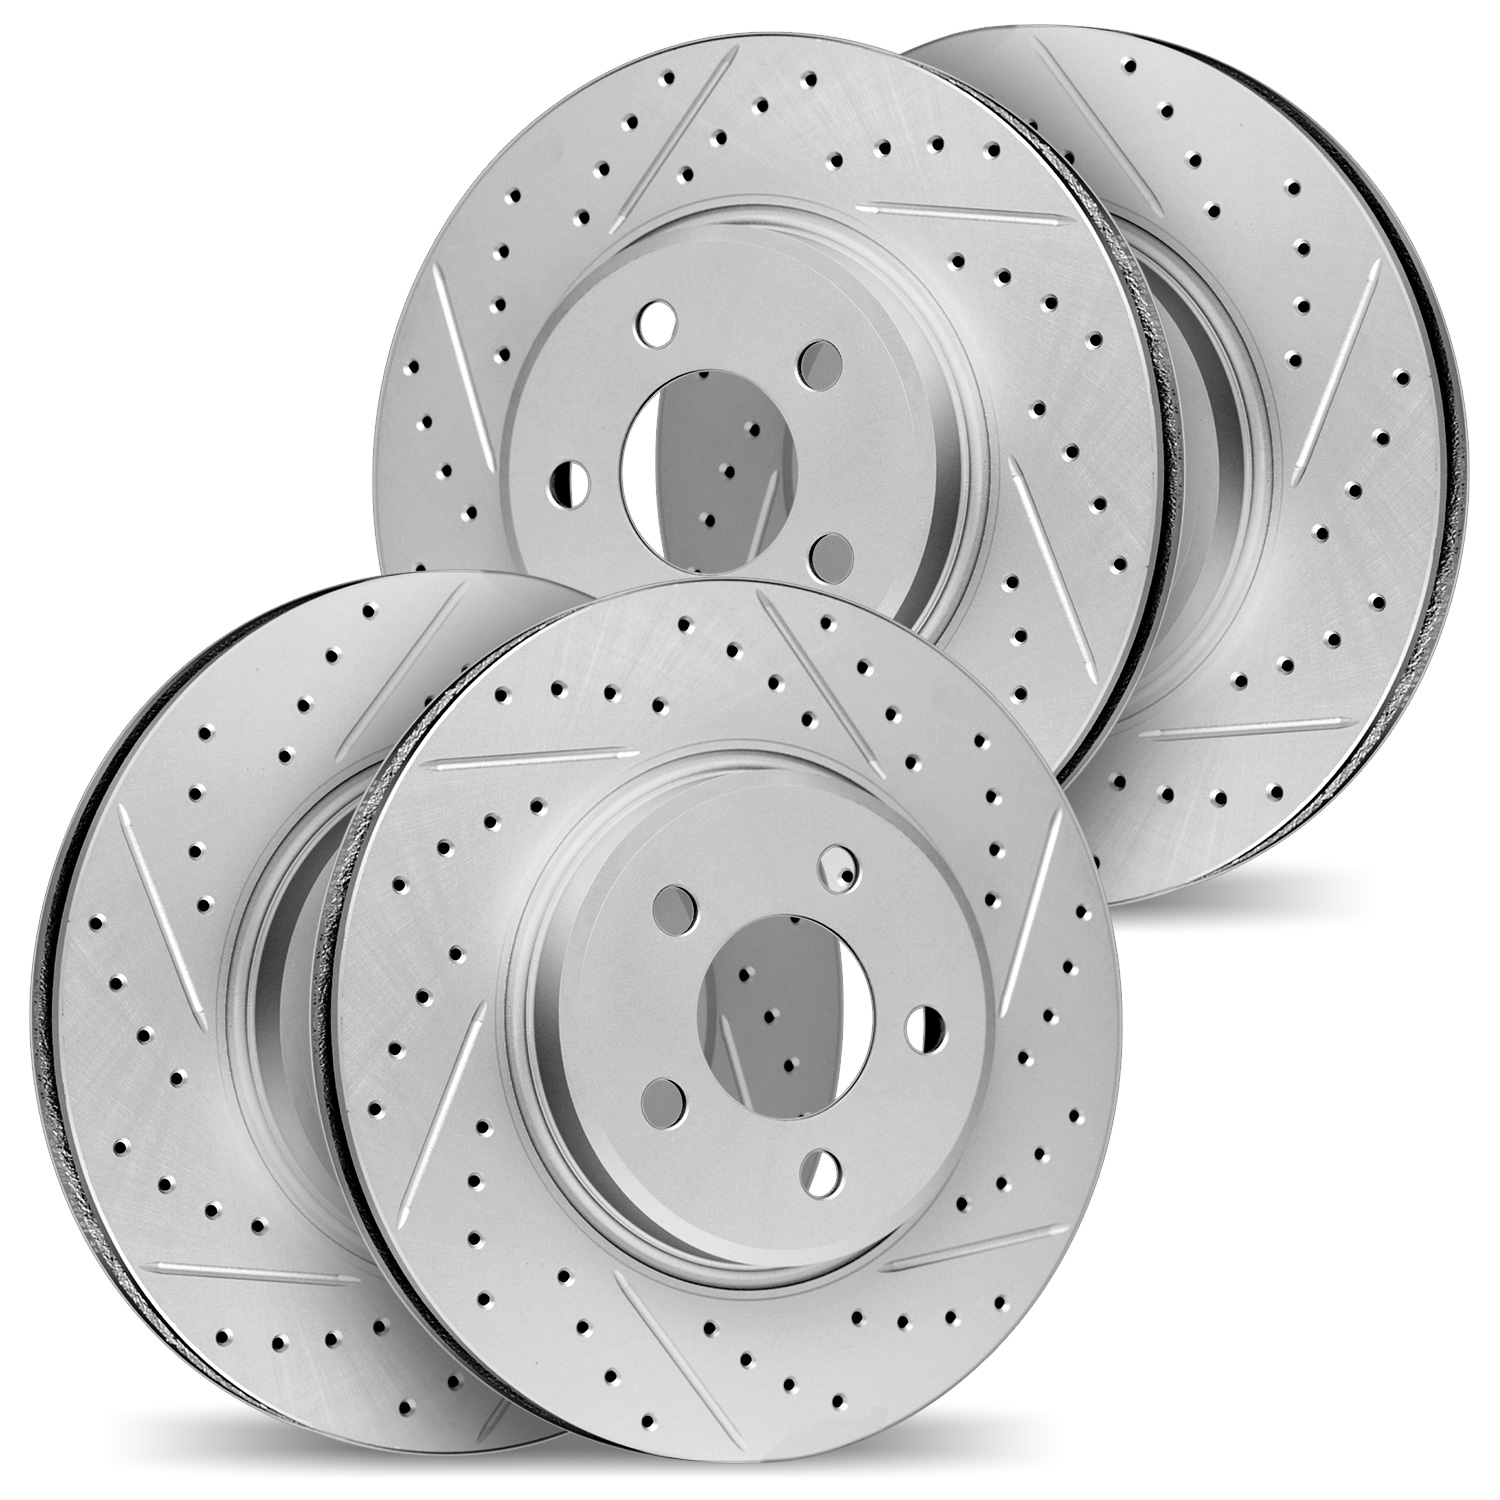 2004-67057 Geoperformance Drilled/Slotted Brake Rotors, Fits Select Infiniti/Nissan, Position: Front and Rear